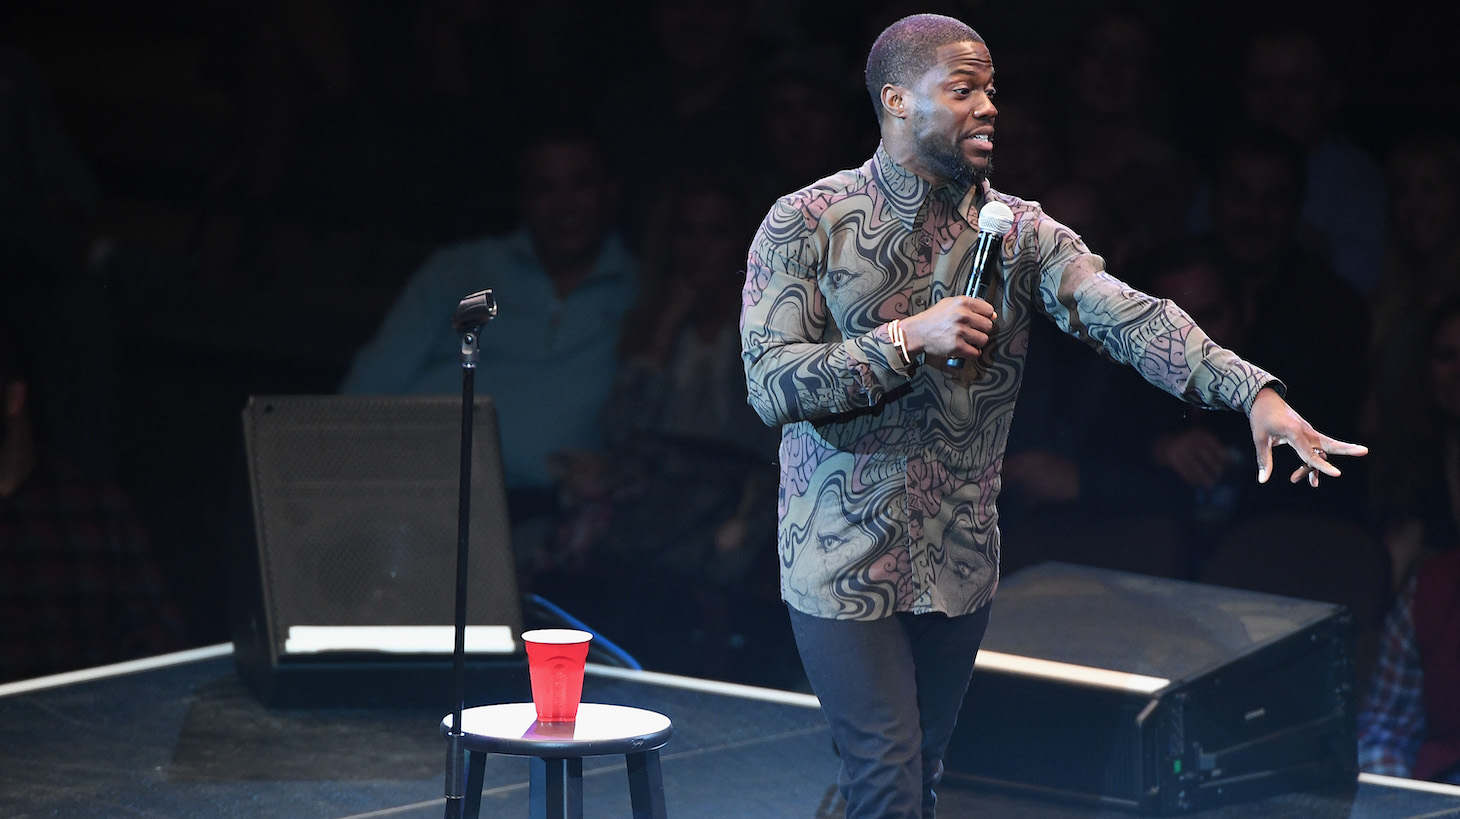 attends Kevin Hart hosts Mohegan Sun's 20th Anniversary Comedy All-Star Gala starring Sarah Silverman, Dave Attell, Margaret Cho &amp; more at Mohegan Sun on October 14, 2016 in Uncasville, Connecticut.